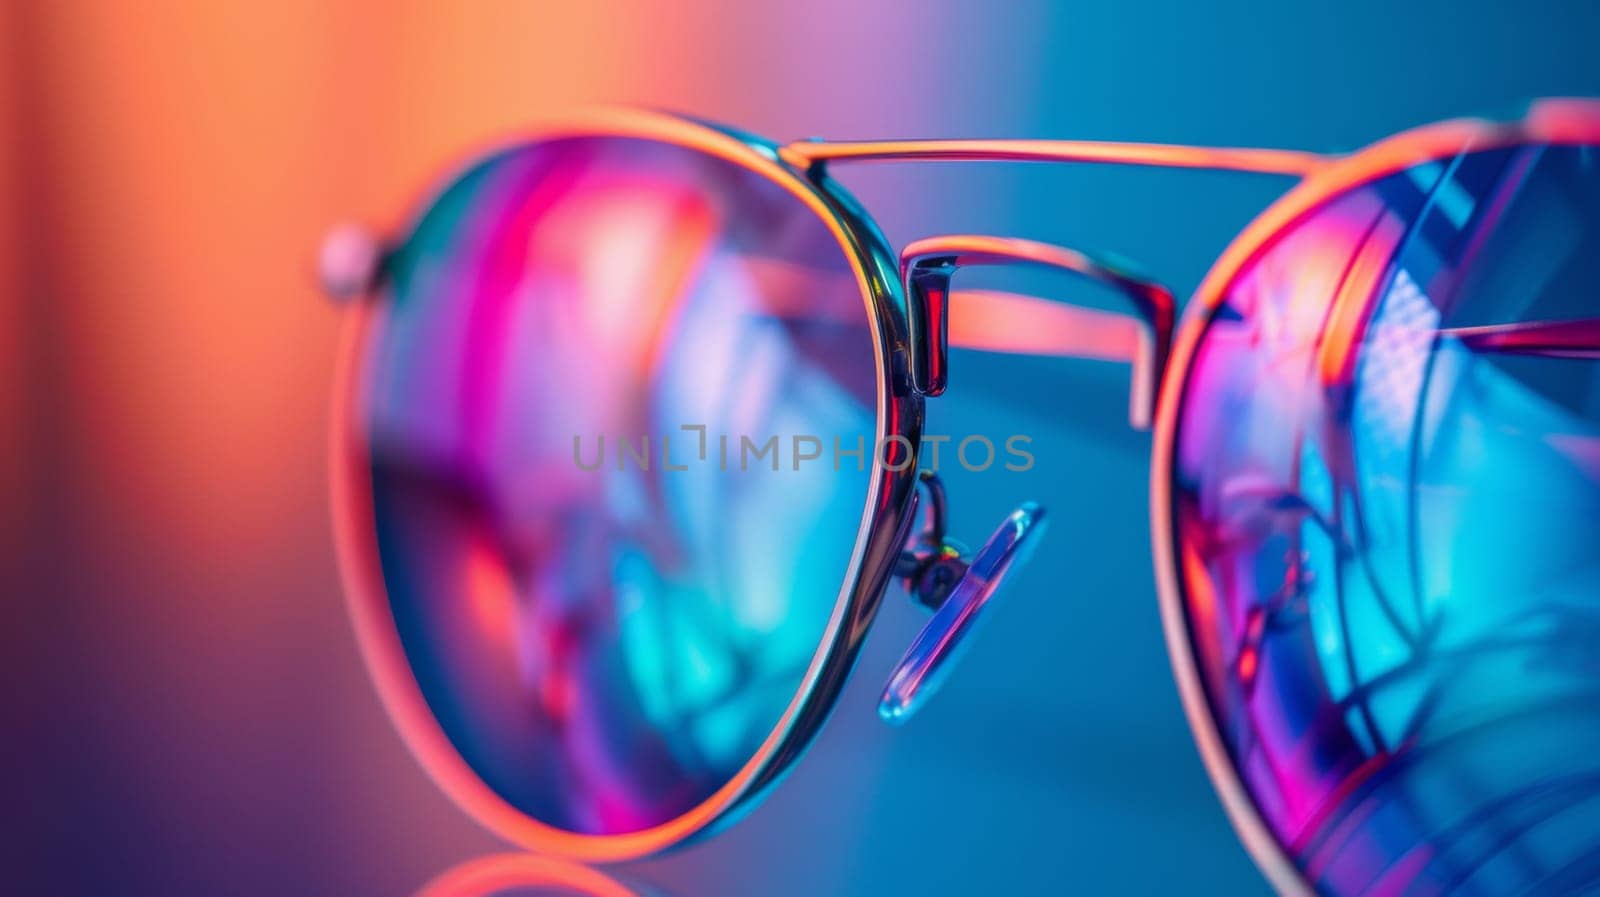 A close up of a pair of sunglasses with colorful reflections